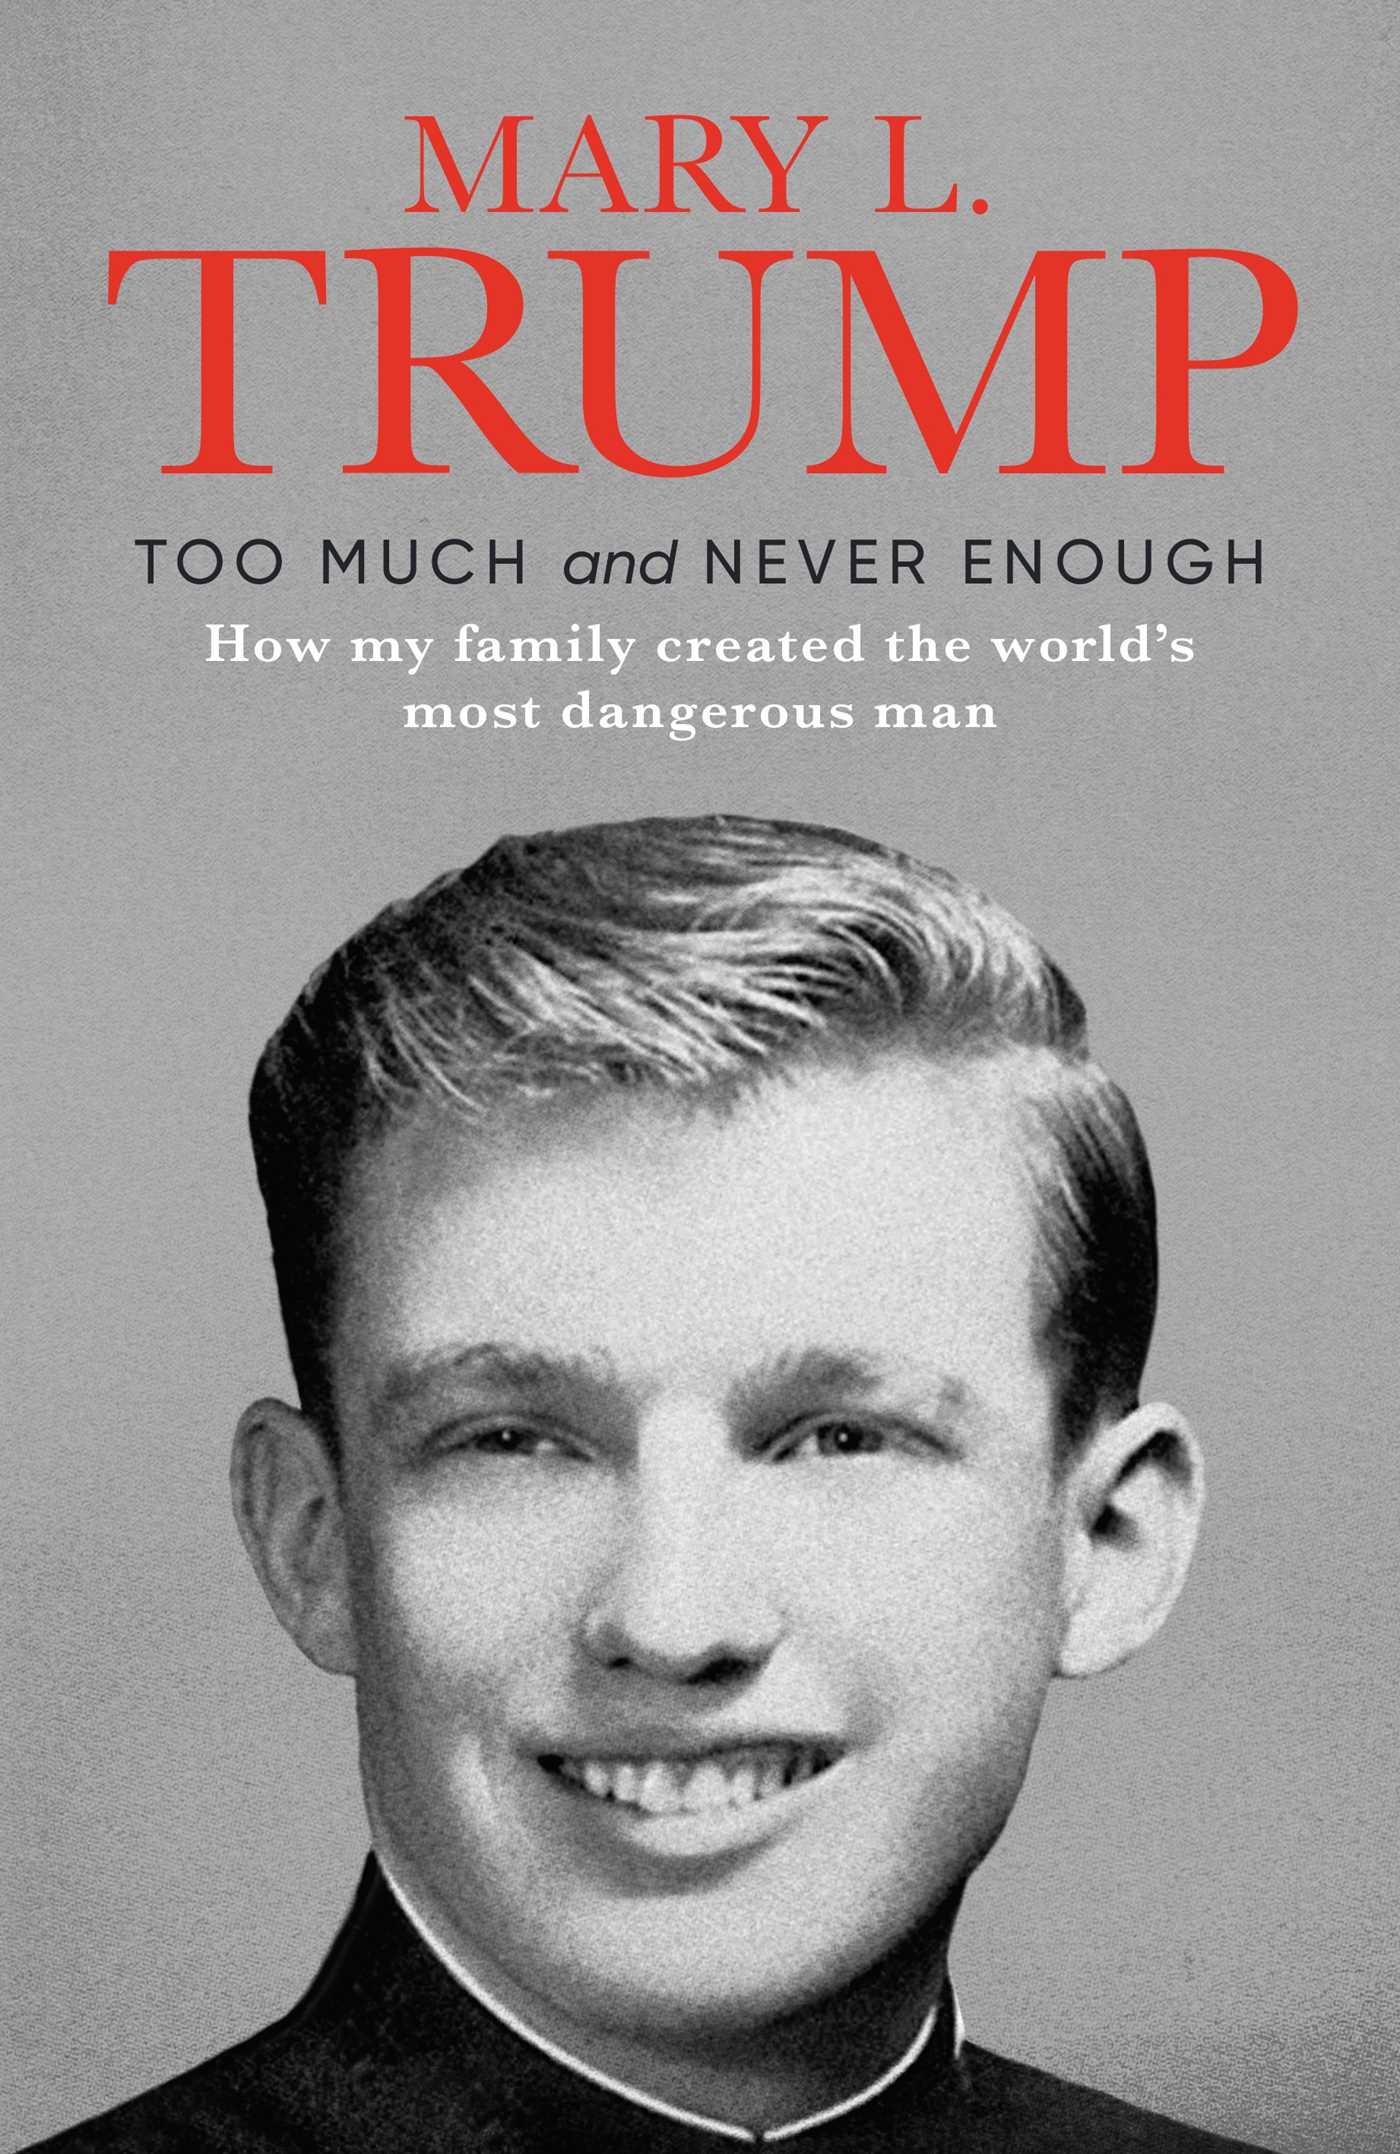 Too Much and Never Enough / How My Family Created the World's Most Dangerous Man / Mary L. Trump / Buch / 240 S. / Englisch / 2020 / Simon & Schuster Ltd / EAN 9781471190131 - Trump, Mary L.